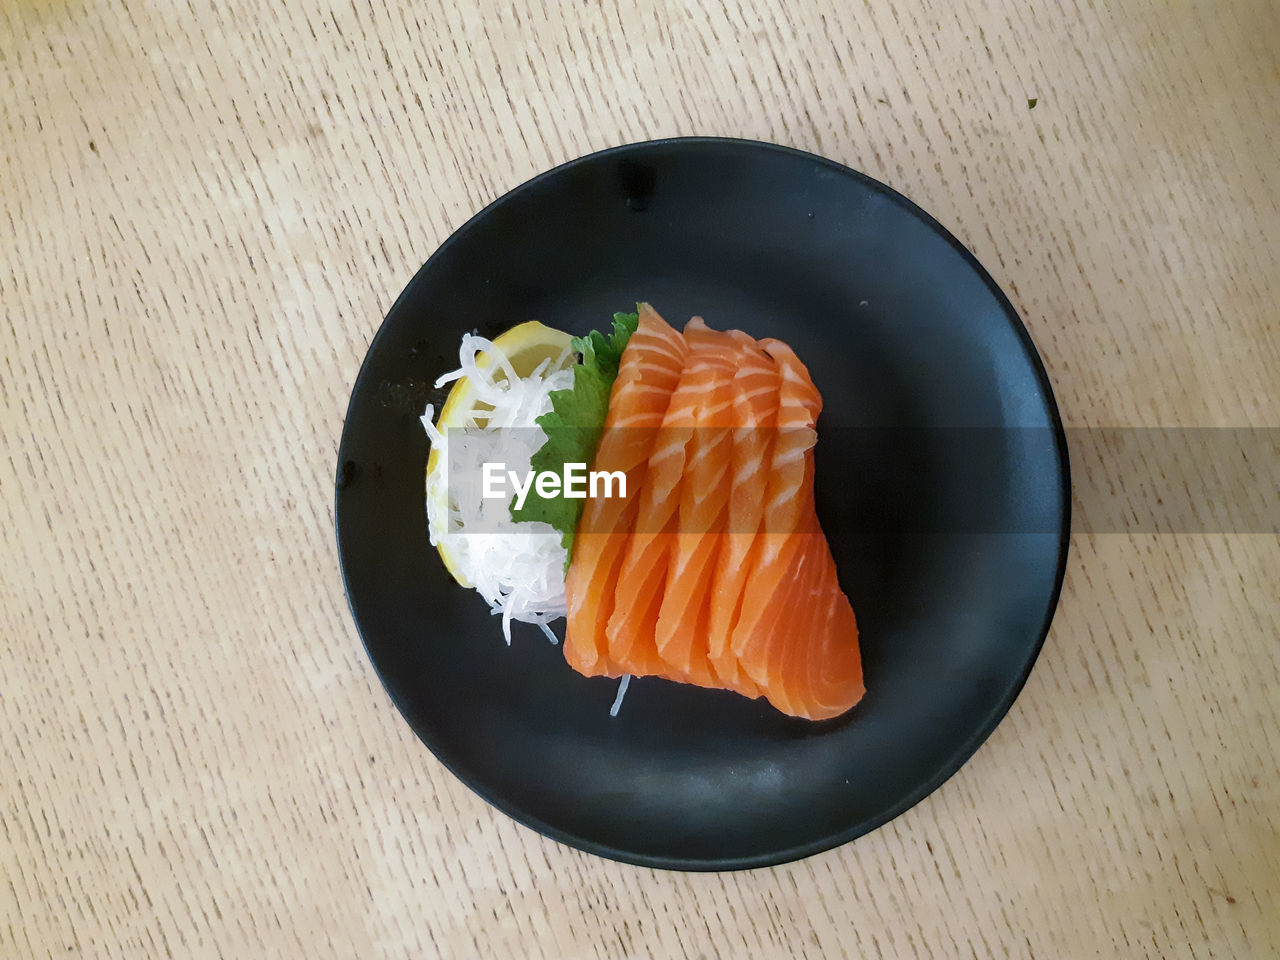 HIGH ANGLE VIEW OF SUSHI SERVED IN PLATE ON TABLE